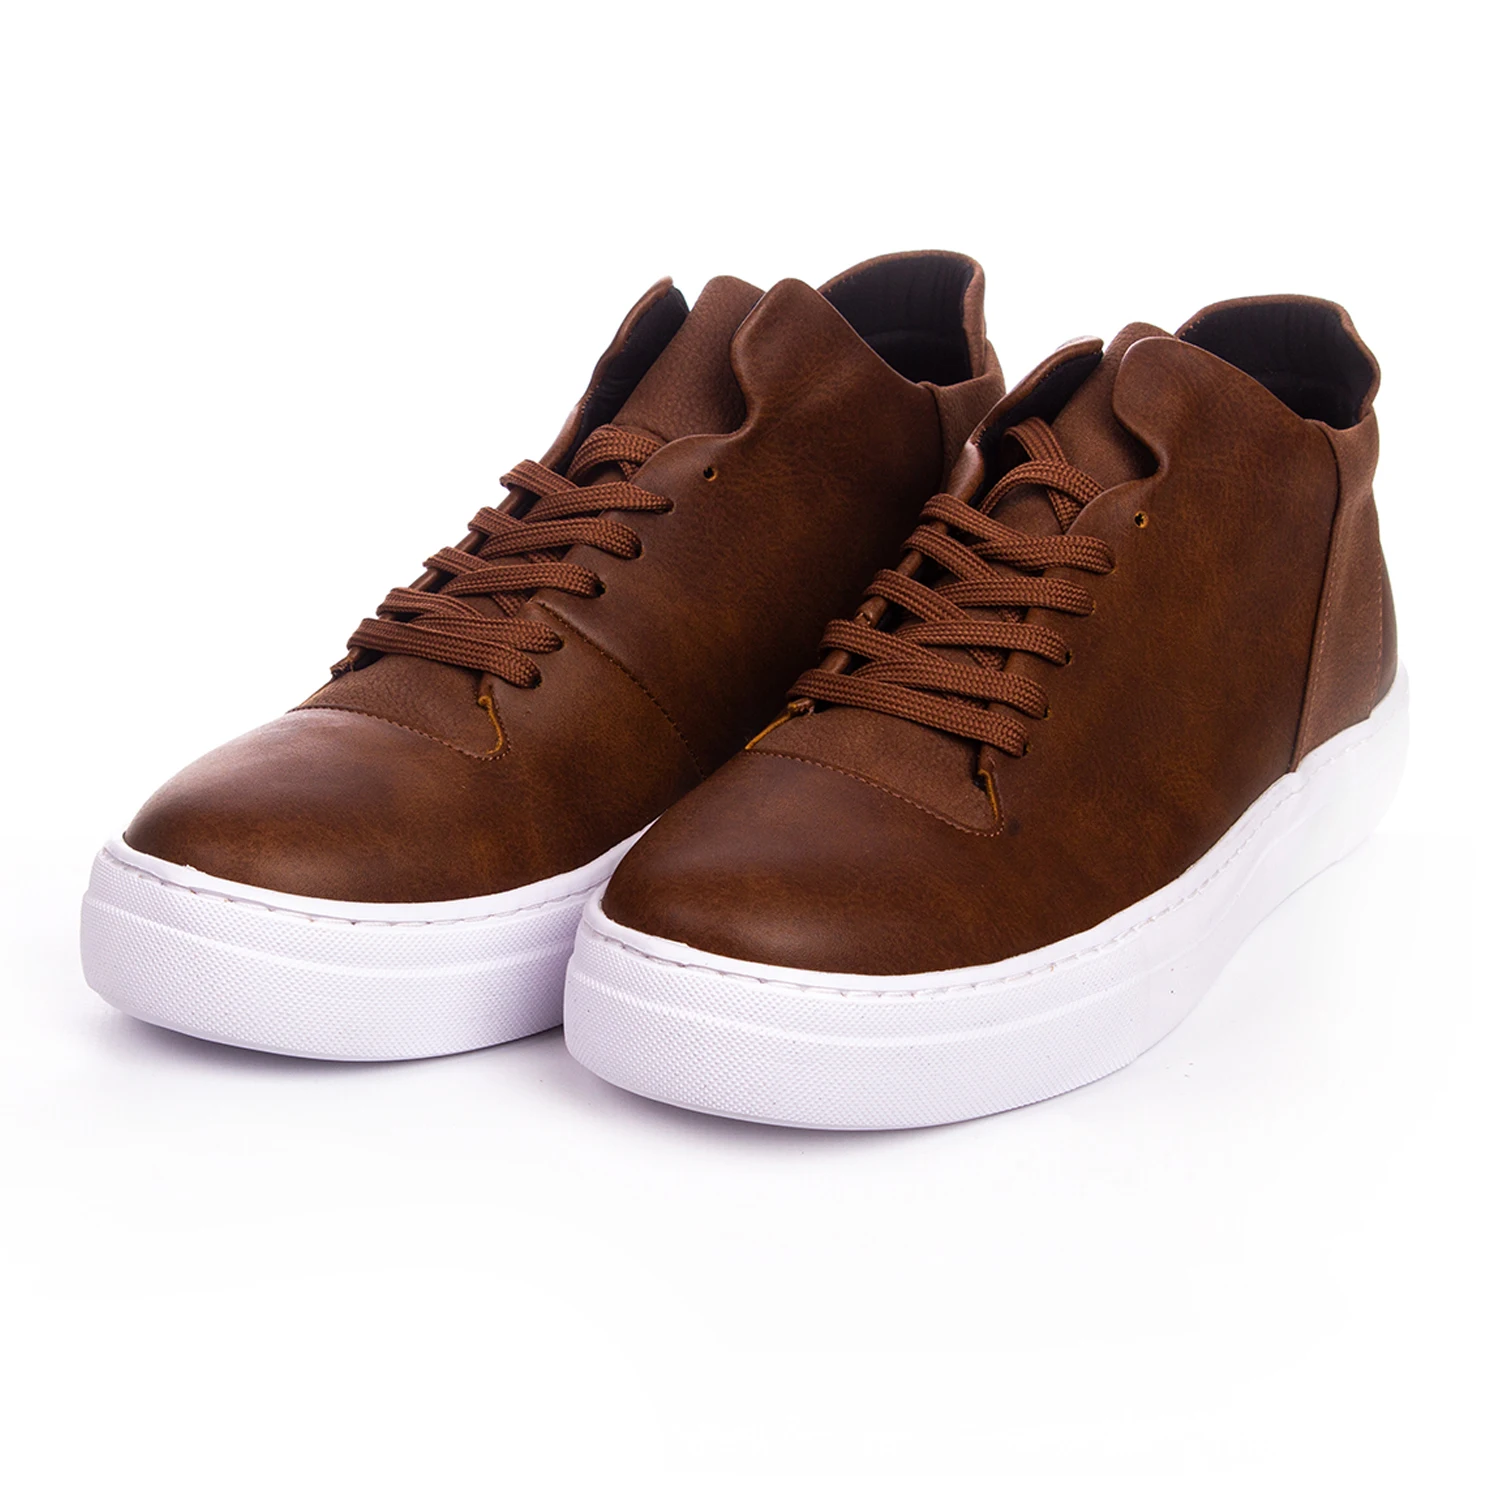 

YTHG Sneakers Brown Artificial Leather Men and Women Casual Shoes Lace-Up Fashion 2021 Autumn Season Wedding Walking Vulcanized Air Brown Flexible Odorless Comfortable Running Orthopedic Walking Sport Footwear Unisex